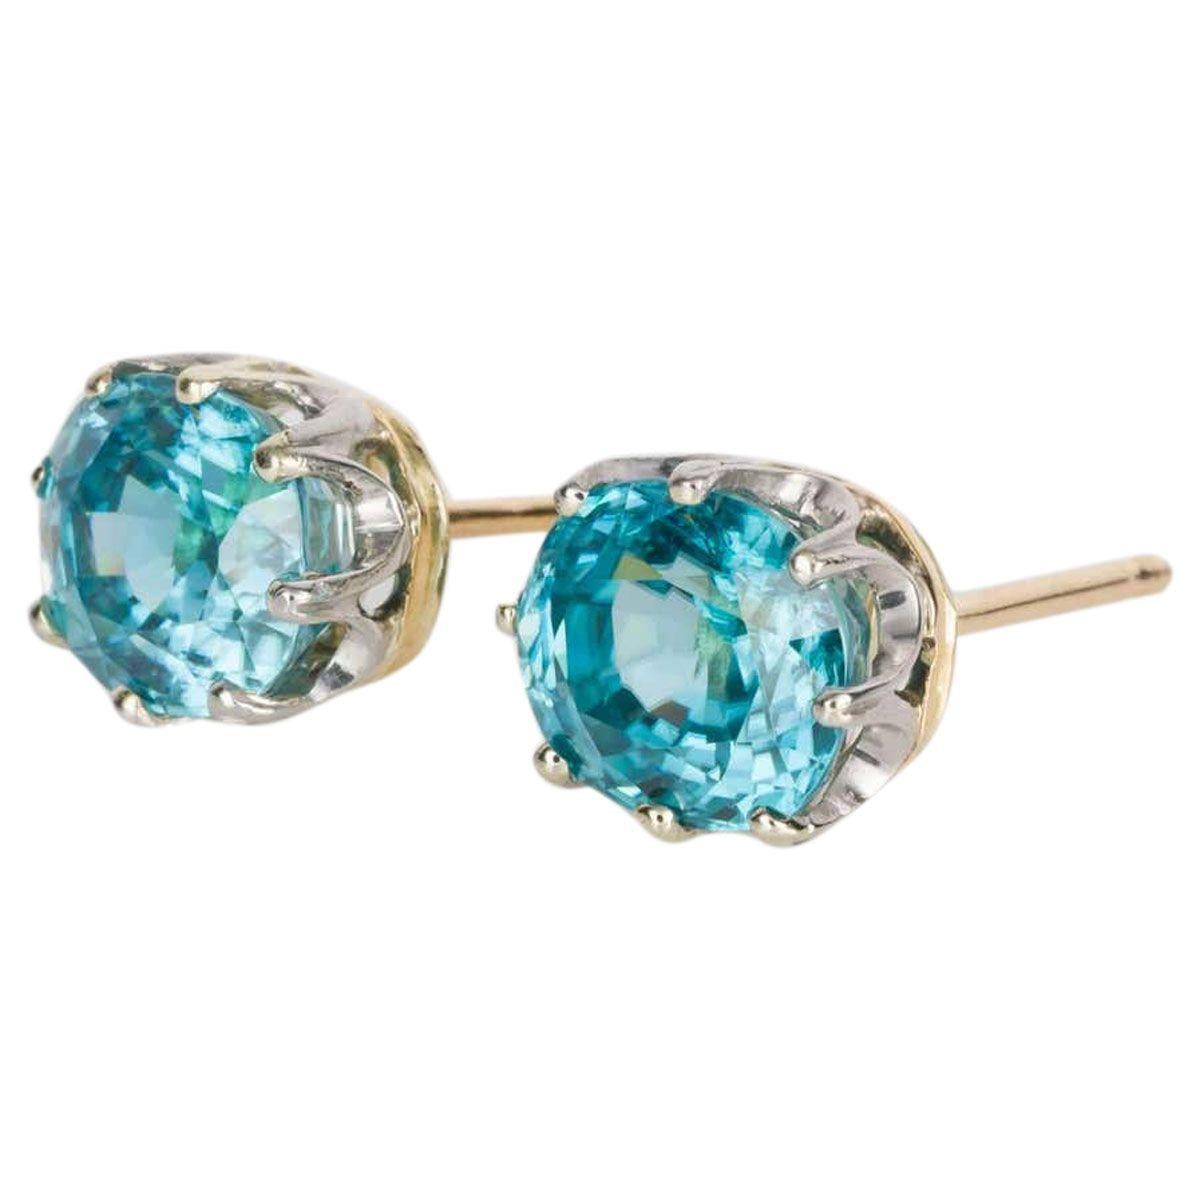 Do you love Blue Zircon? Well this pair of earrings has the most beautiful blue zircons we have seen for a long time. The colour is mesmerising like the azure waters of some far away island, with added brilliance and sparkle. Truly they are